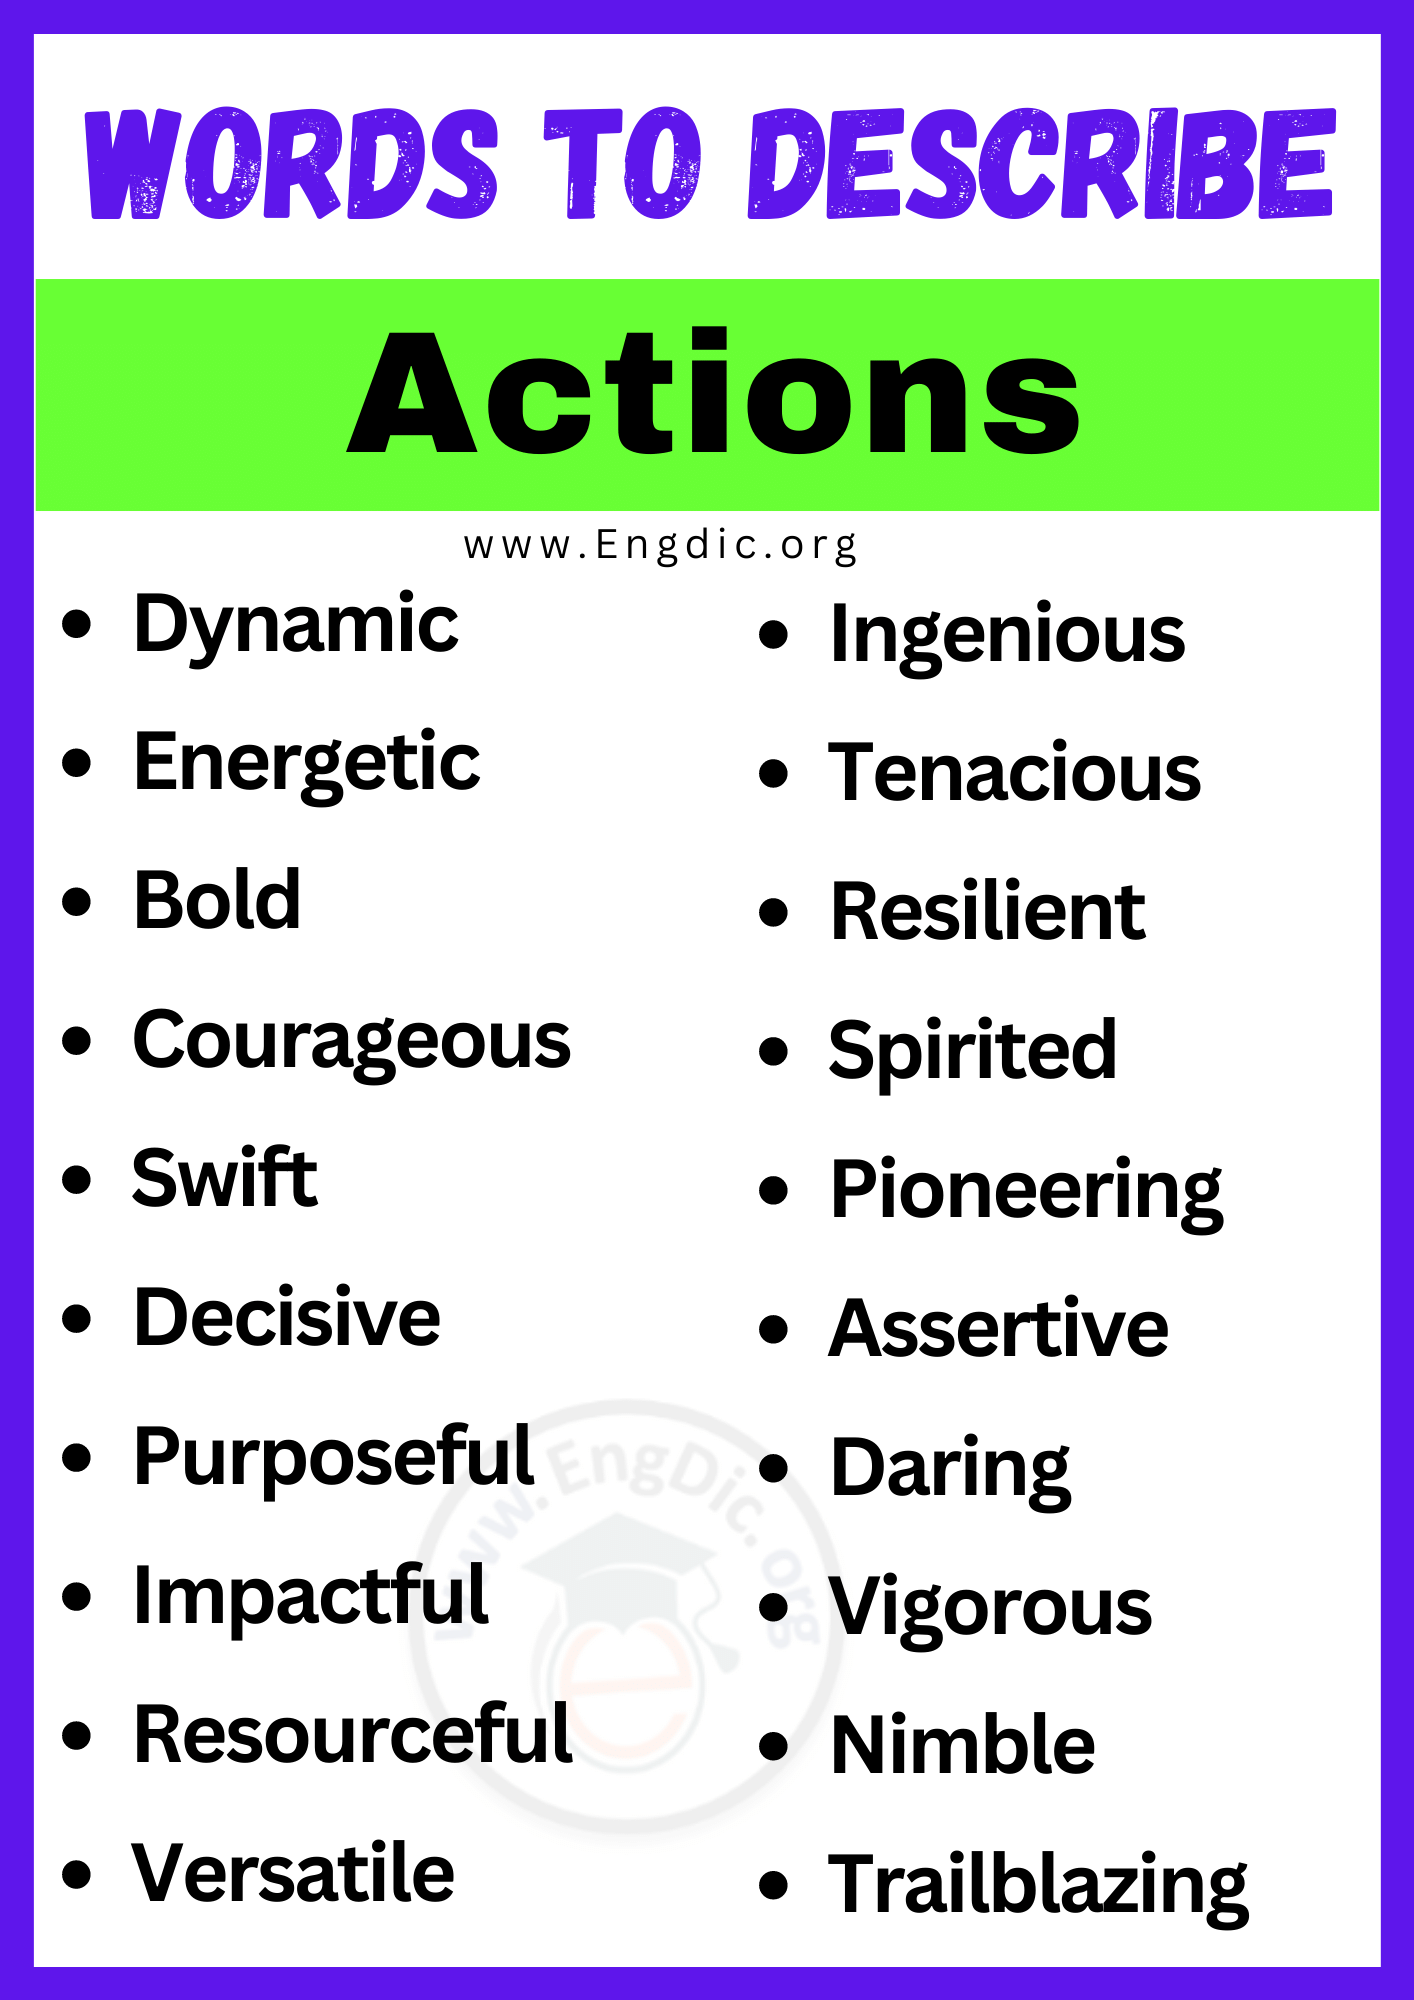 Words to Describe Actions